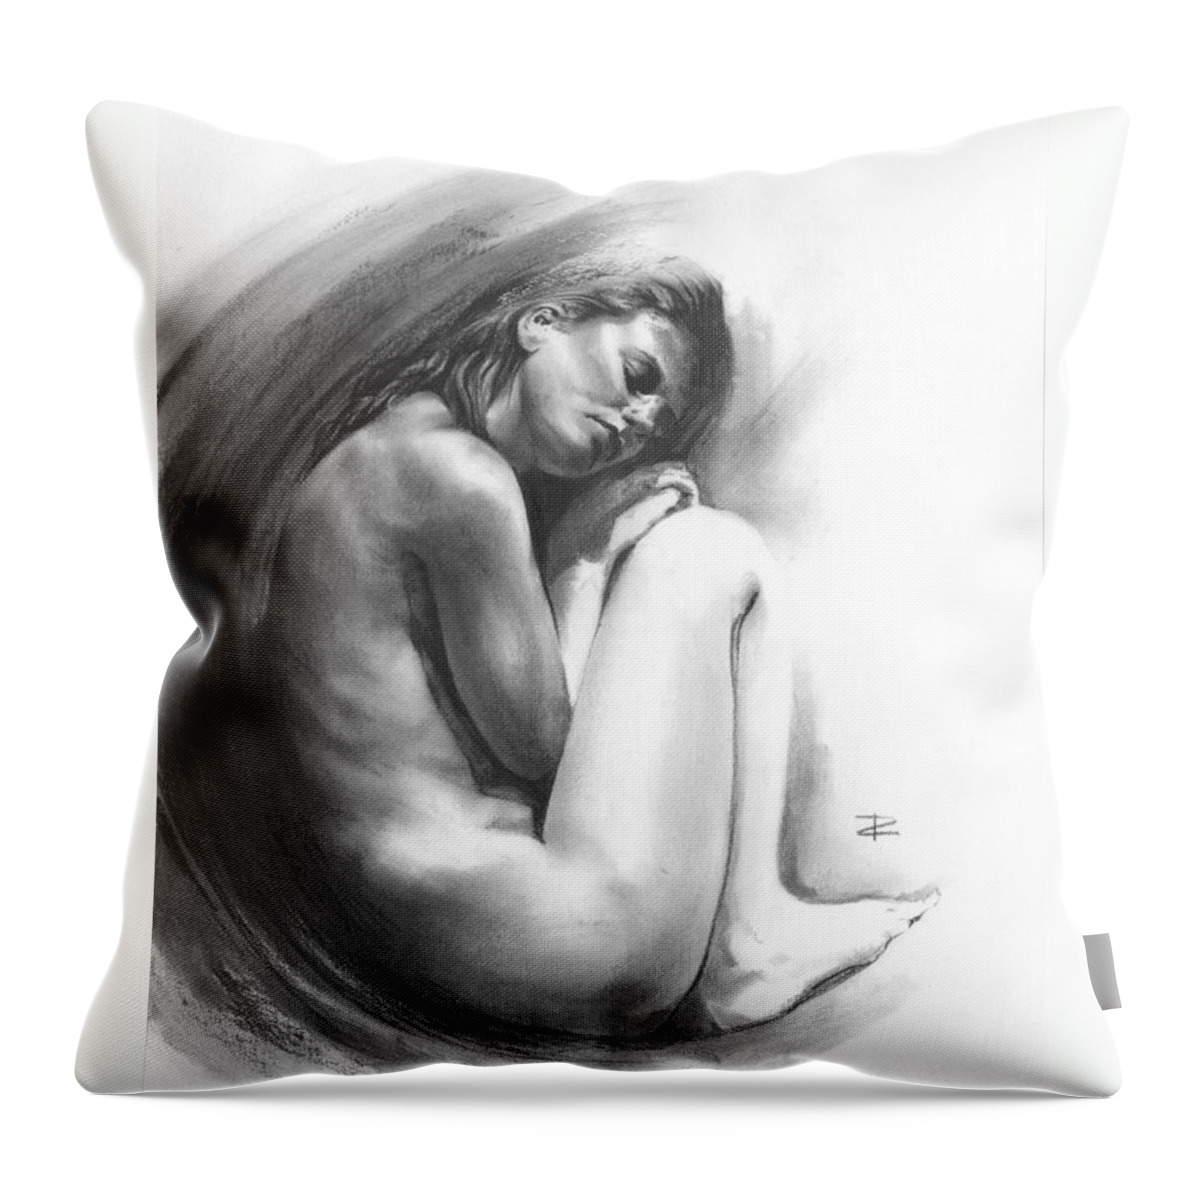 Embryonic 1 Throw Pillow featuring the drawing Embryonic 1 by Paul Davenport